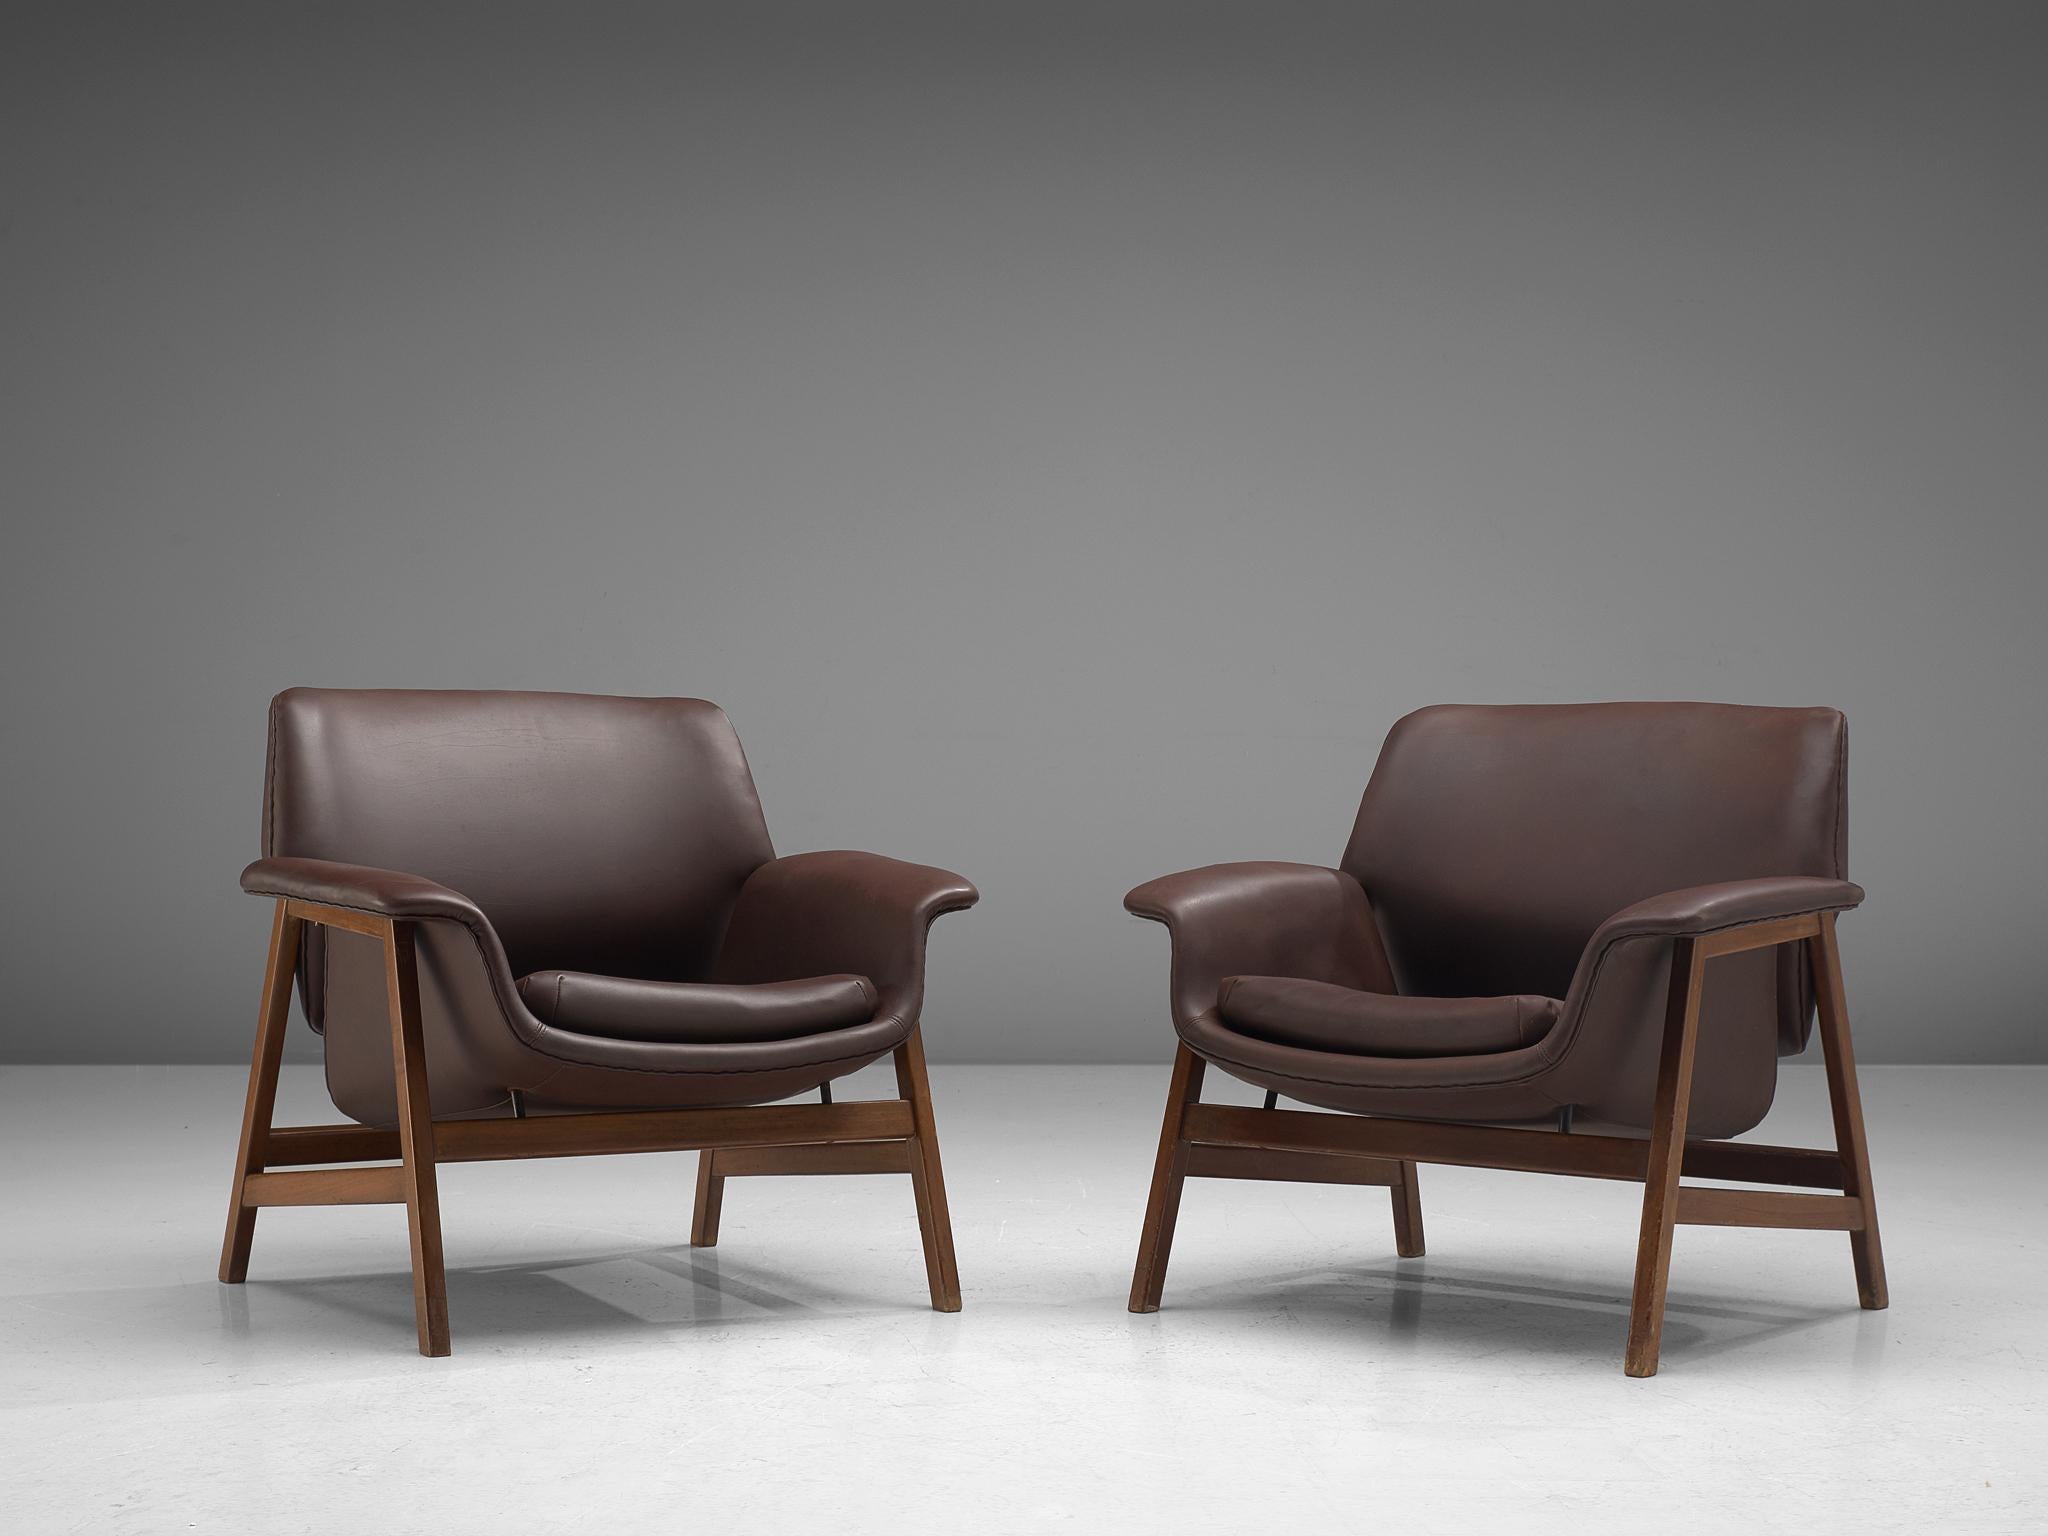 Italian Gianfranco Frattini for Cassina Pair of Lounge chairs '849' in Walnut